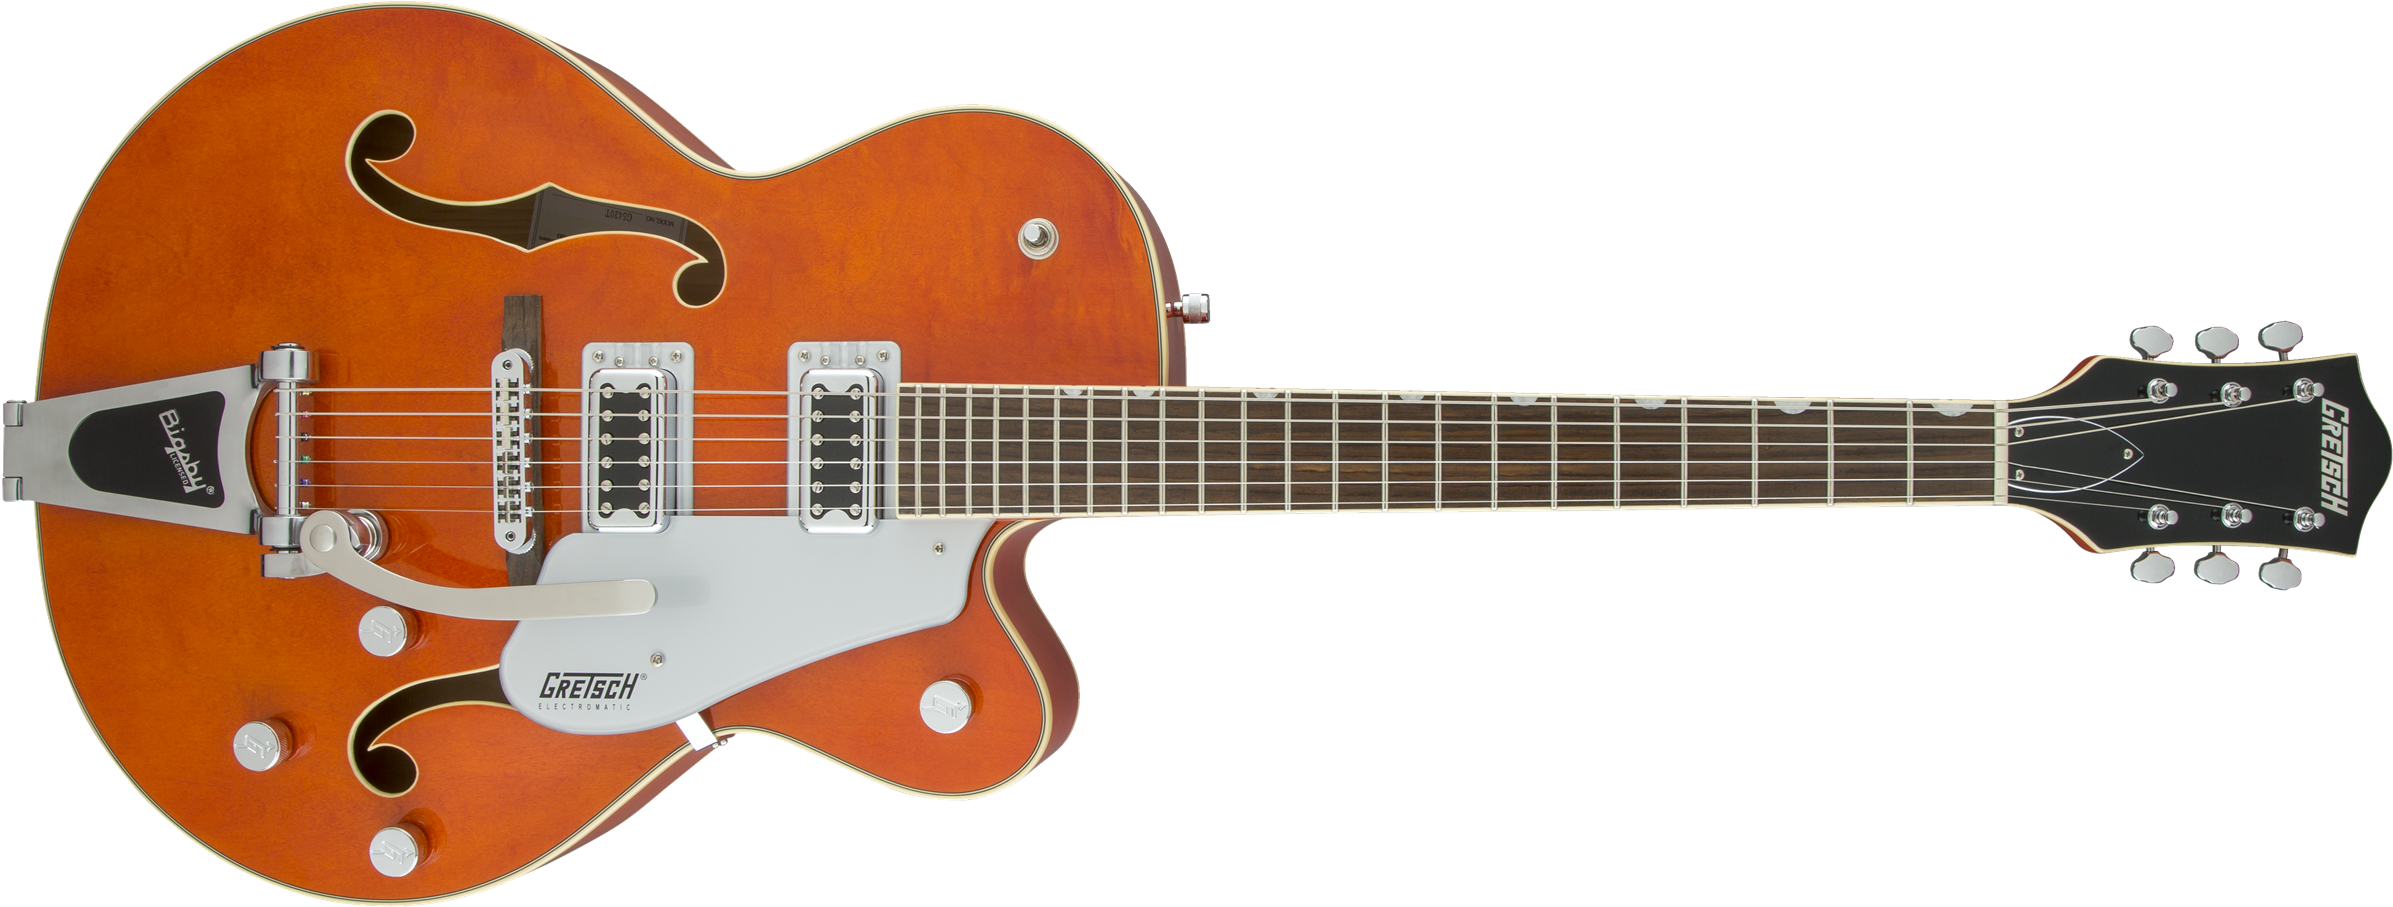 Hollow Body - Gretsch G5420t Electromatic Hollowbody Orange Stain (2400x915), Png Download